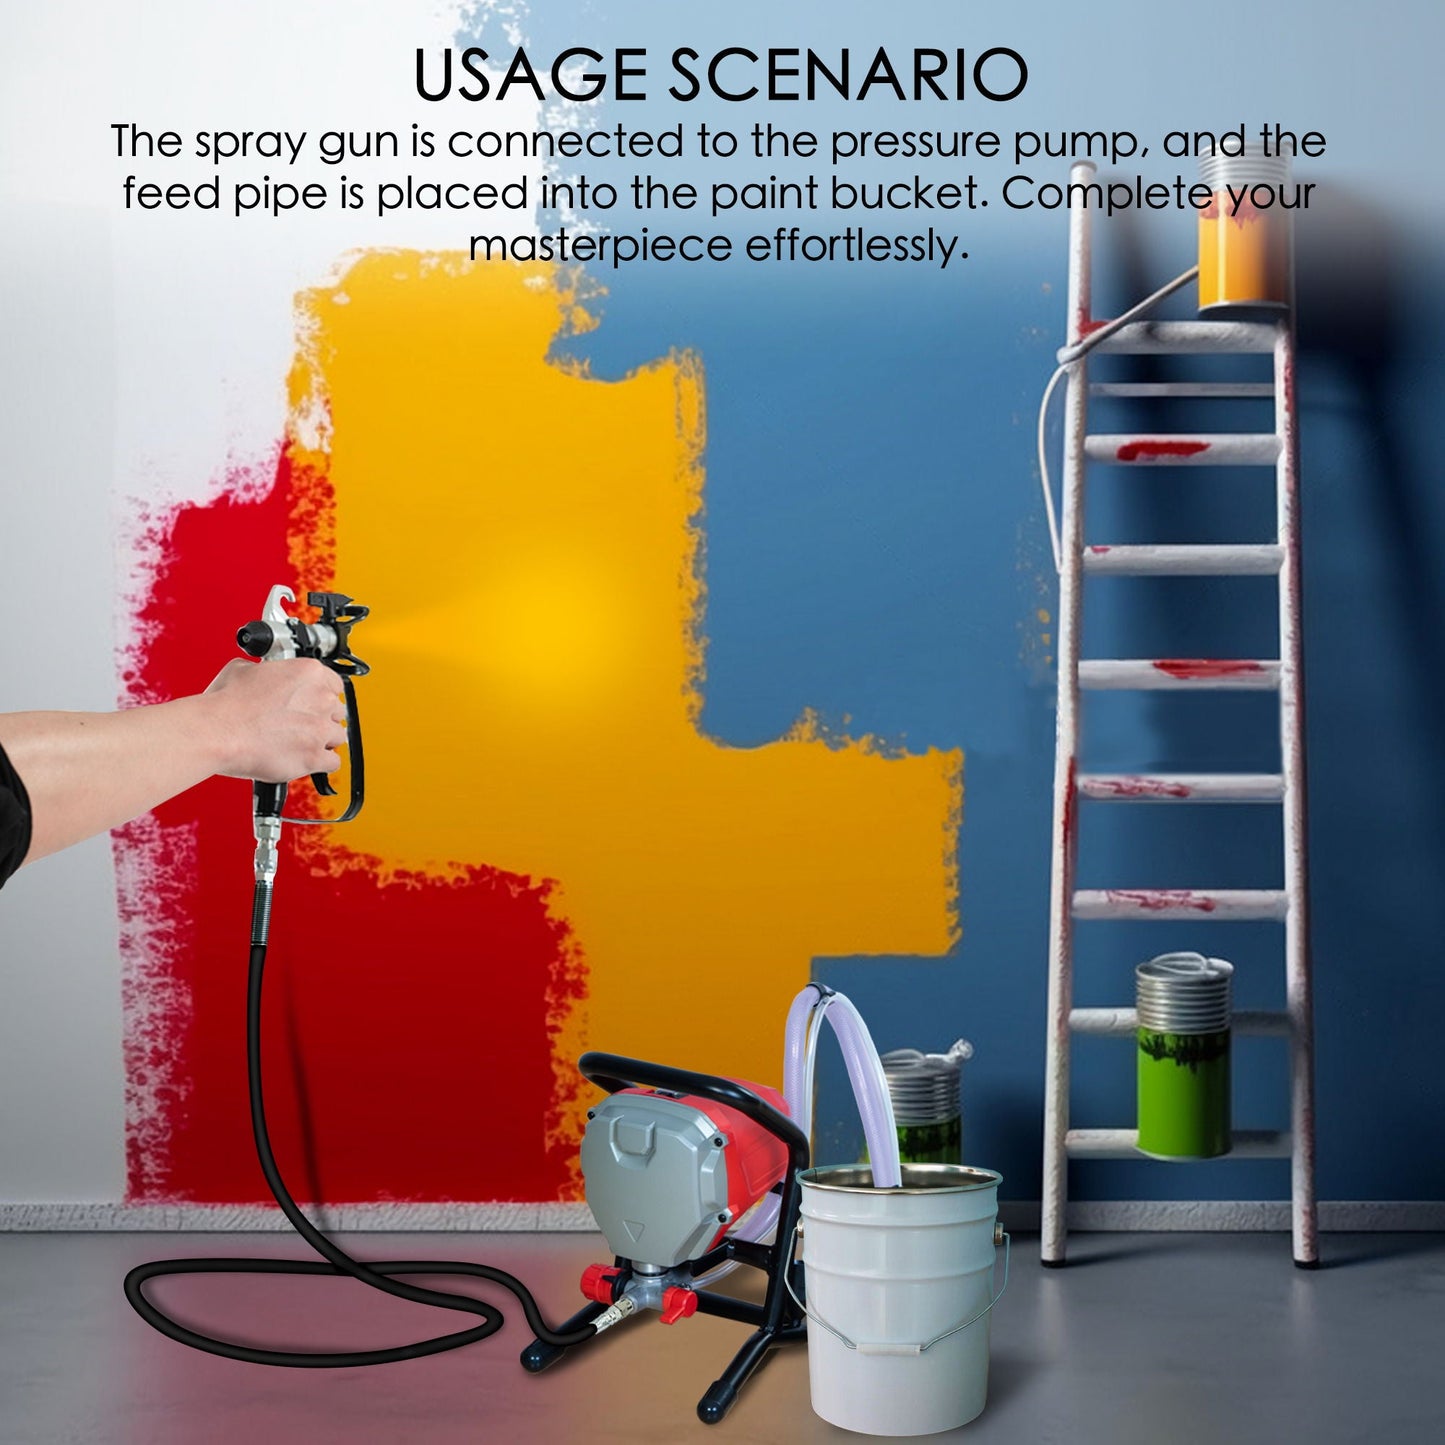 Himalaya High Pressure Airless Paint Sprayer - 3000PSI, 5/8HP, 650W Power Painter, Ideal for Home Interior, Exterior, Commercial Use, and DIY Handyman-Professional Contractor Grade Spray Paint Machine